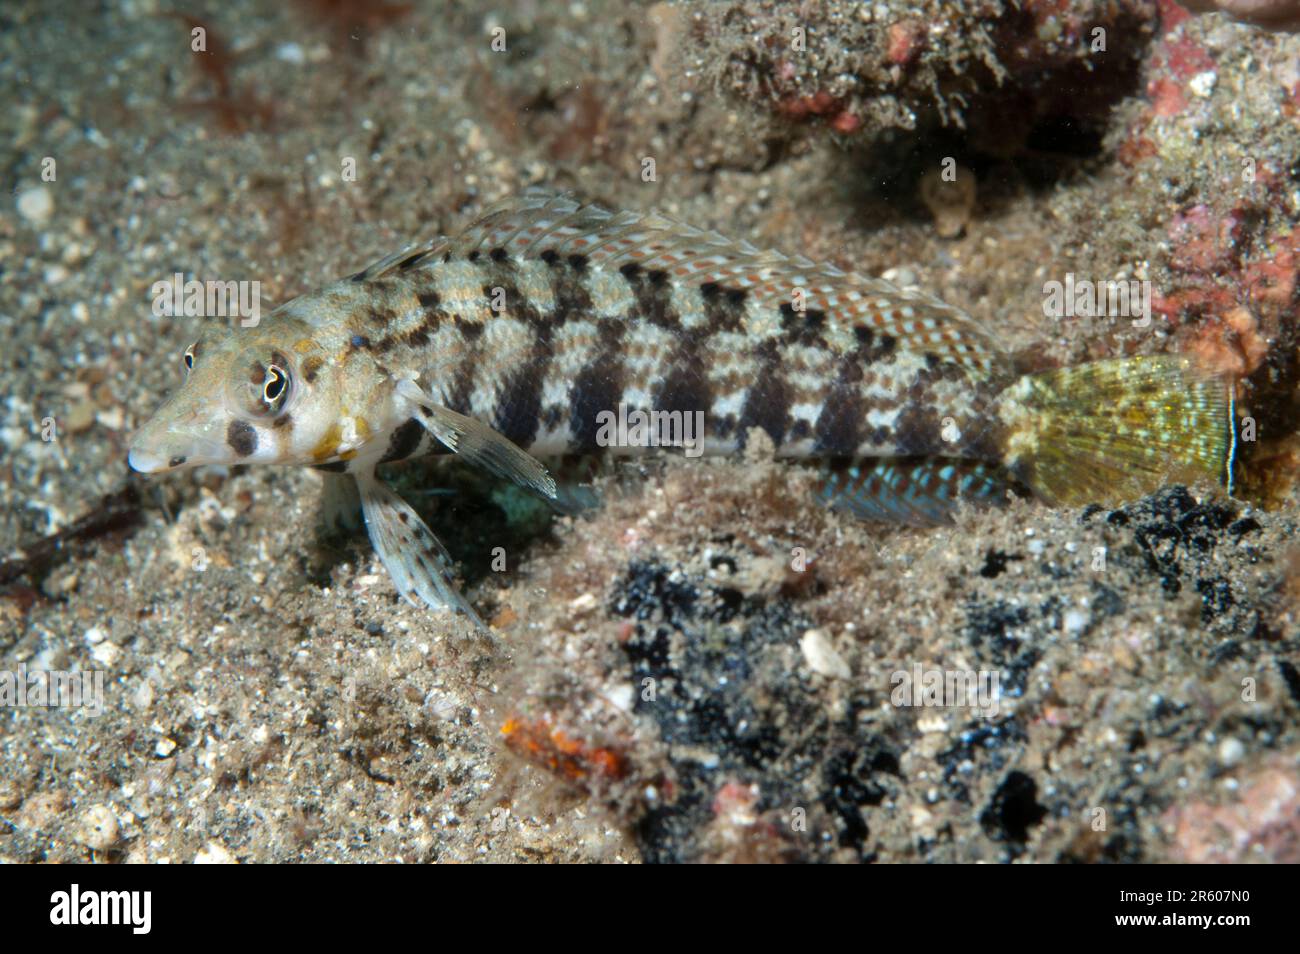 Sharpnose Sandperch, Parapercis cylindrica, on sand, Nudi Falls dive site dive site, Lembeh Straits, Sulawesi, Indonesia Stock Photo